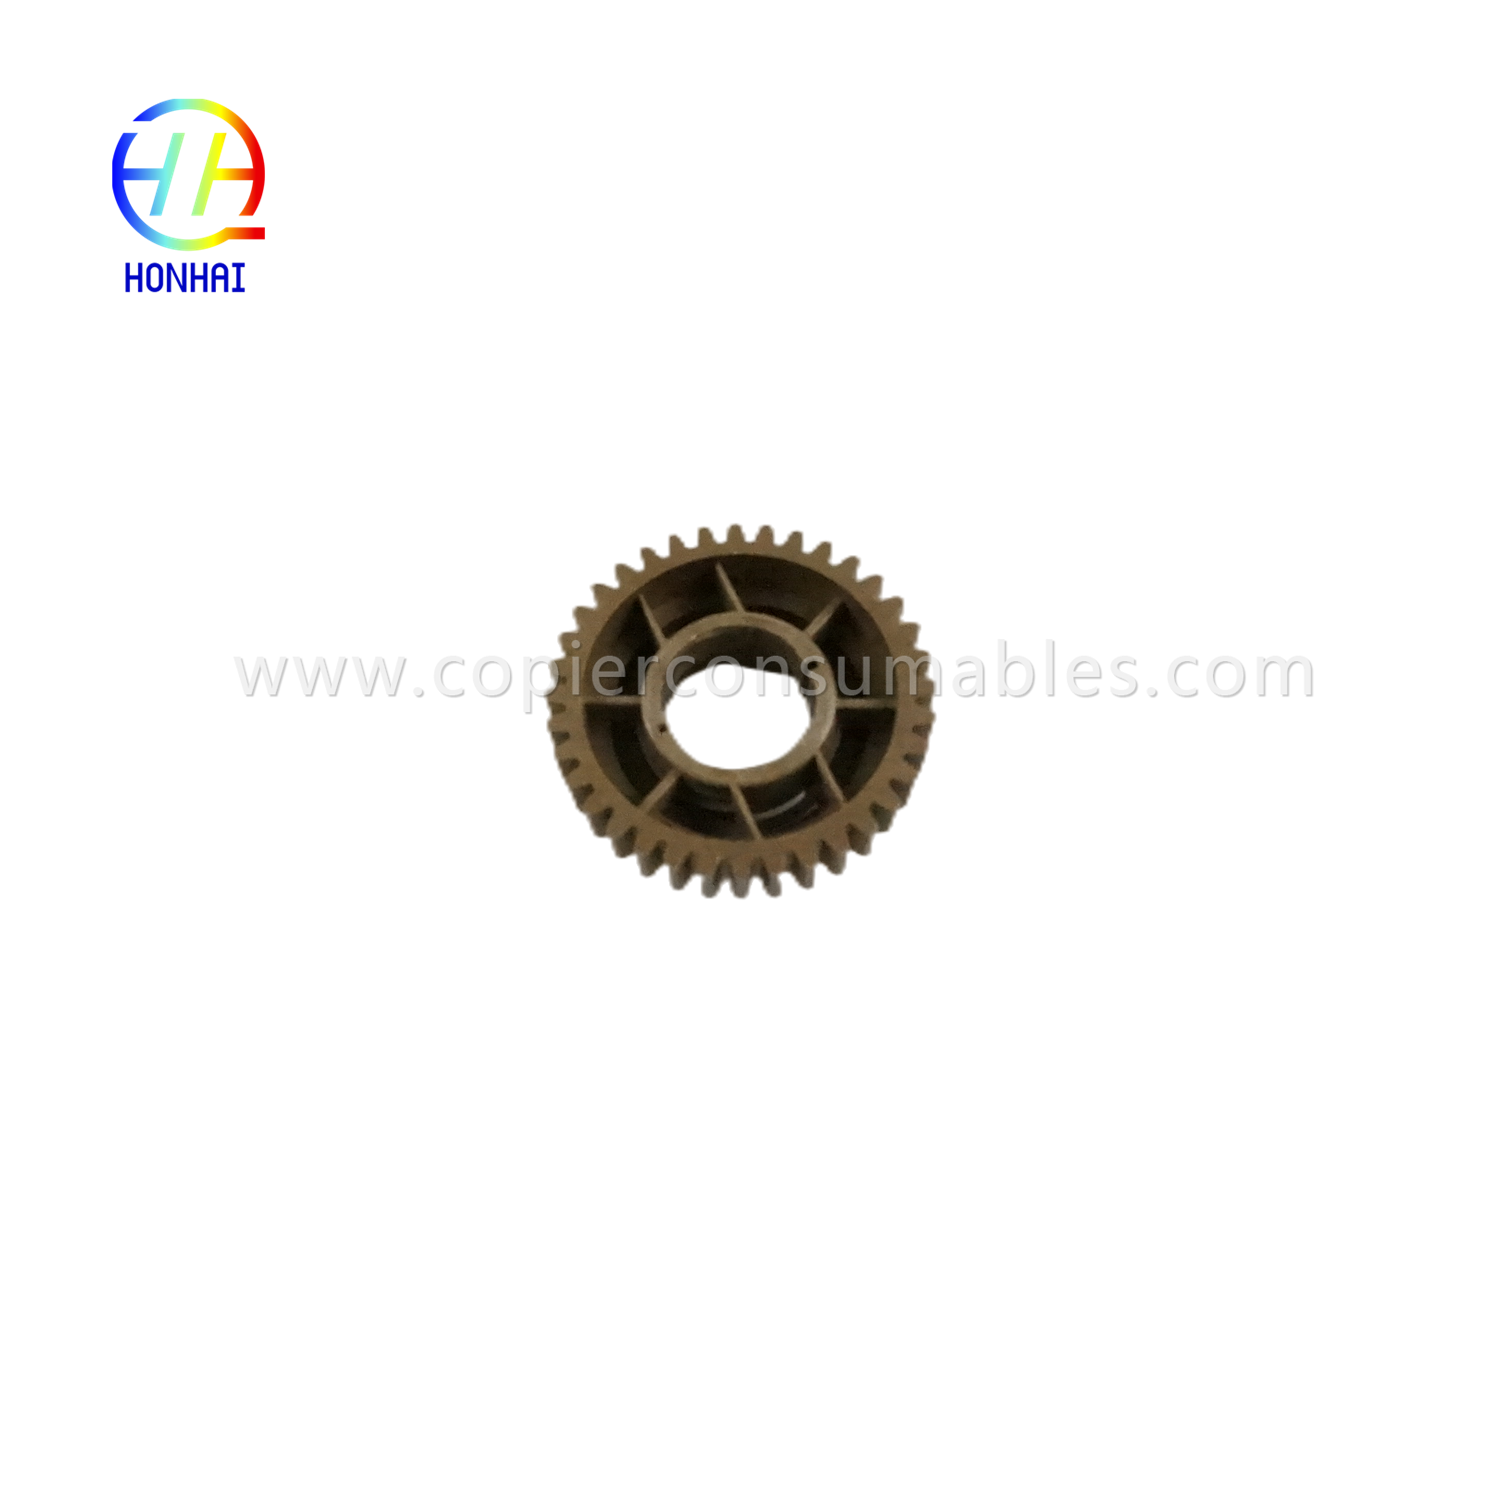 https://www.copierconsumables.com/upper-roller-gear-for-samsung-4020-4072-jc66-02775ab-product/